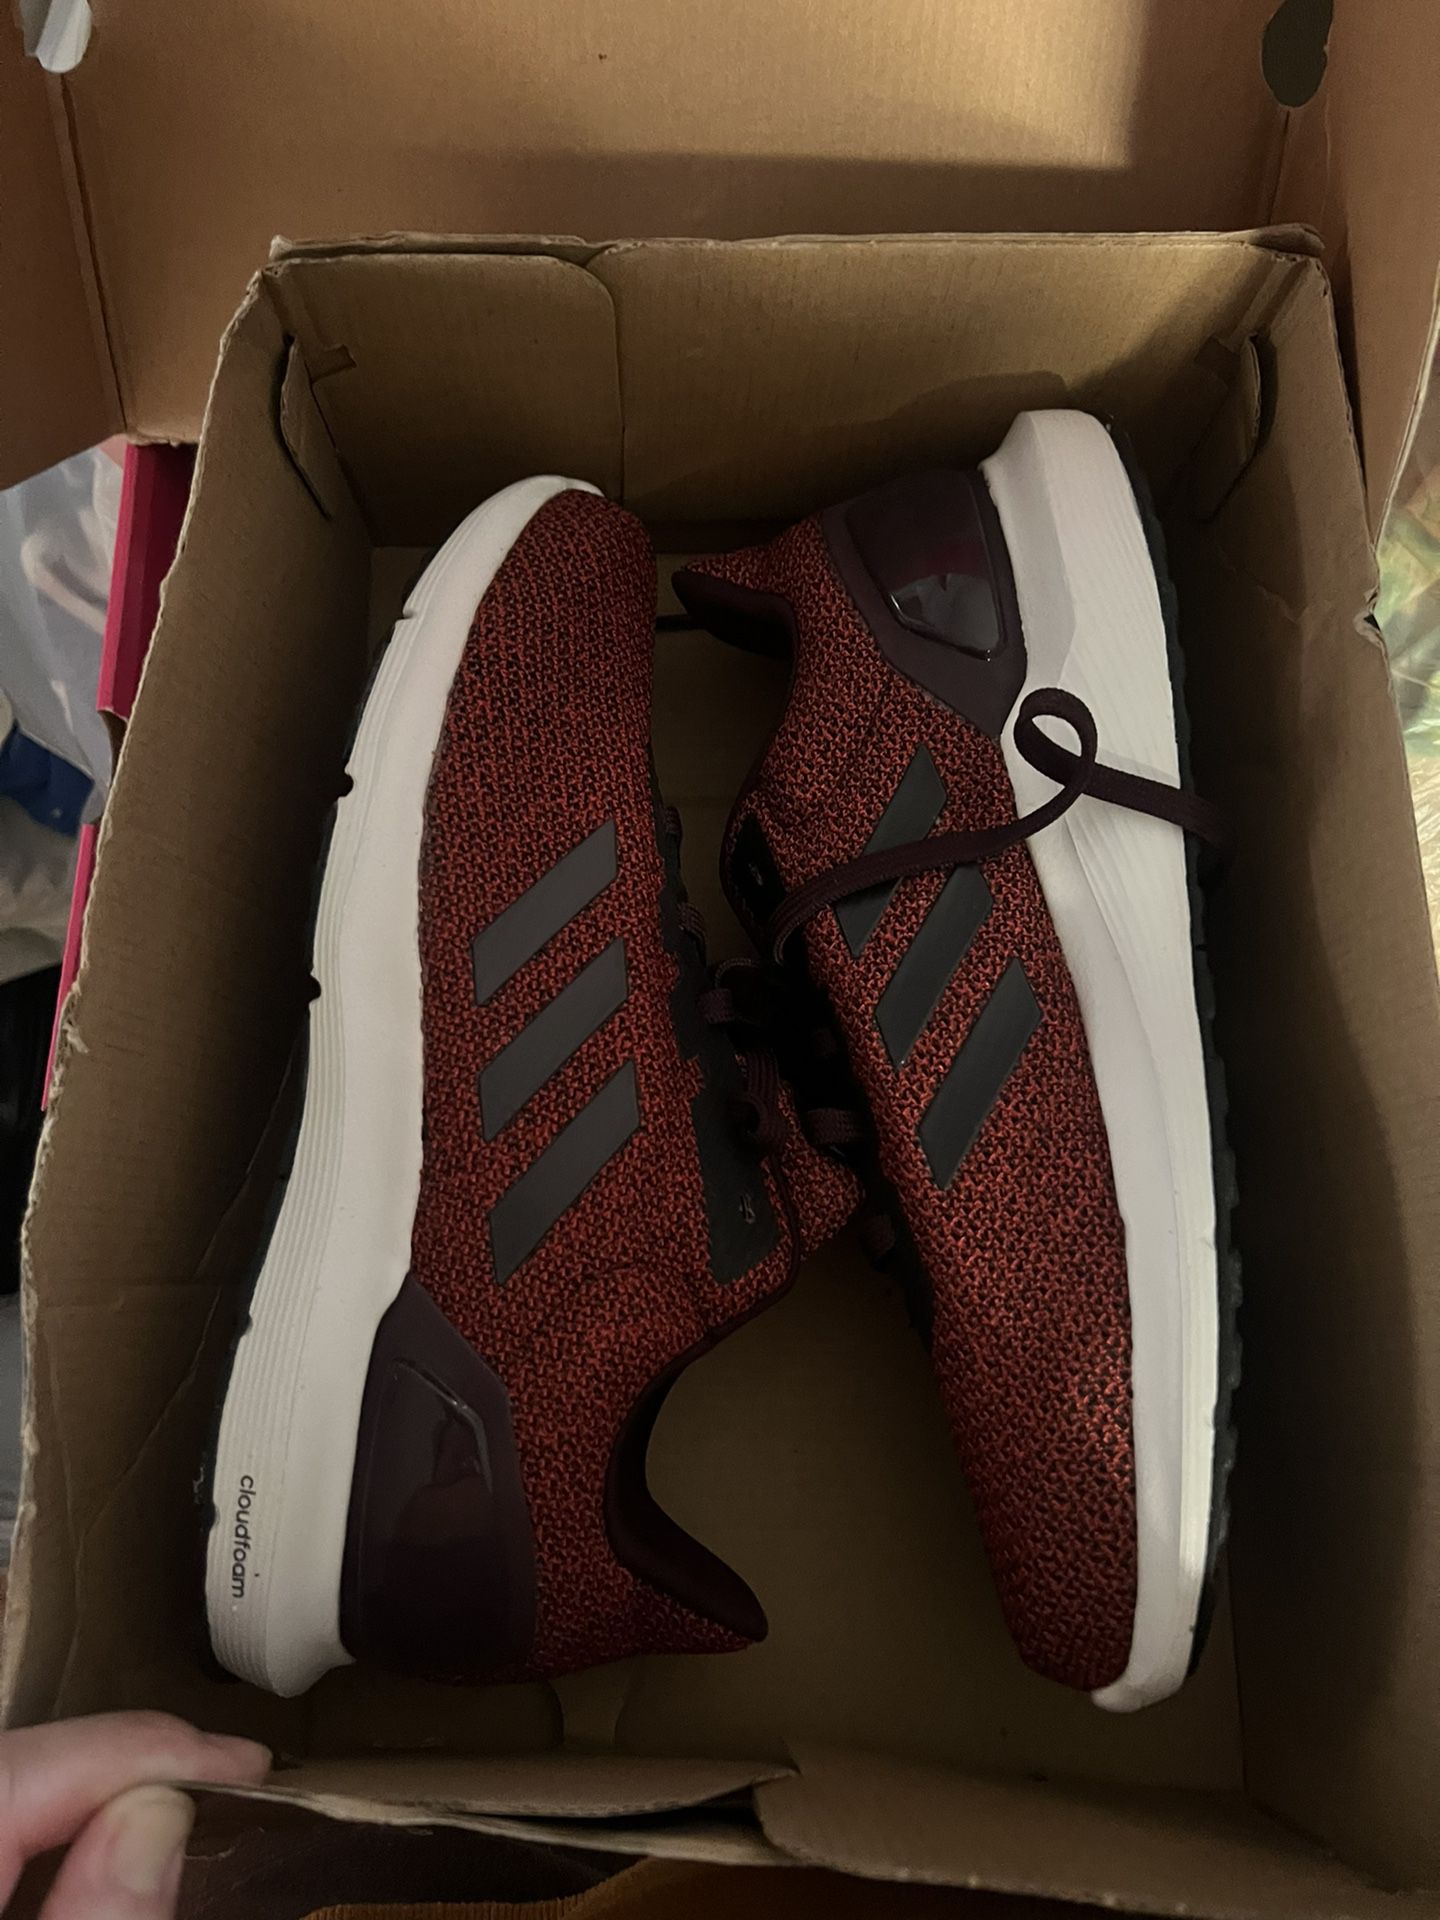 Size 7.5 Womens Addidas Running/gym Shoes. New In Box. $65 Or Best Reasonable Offer 